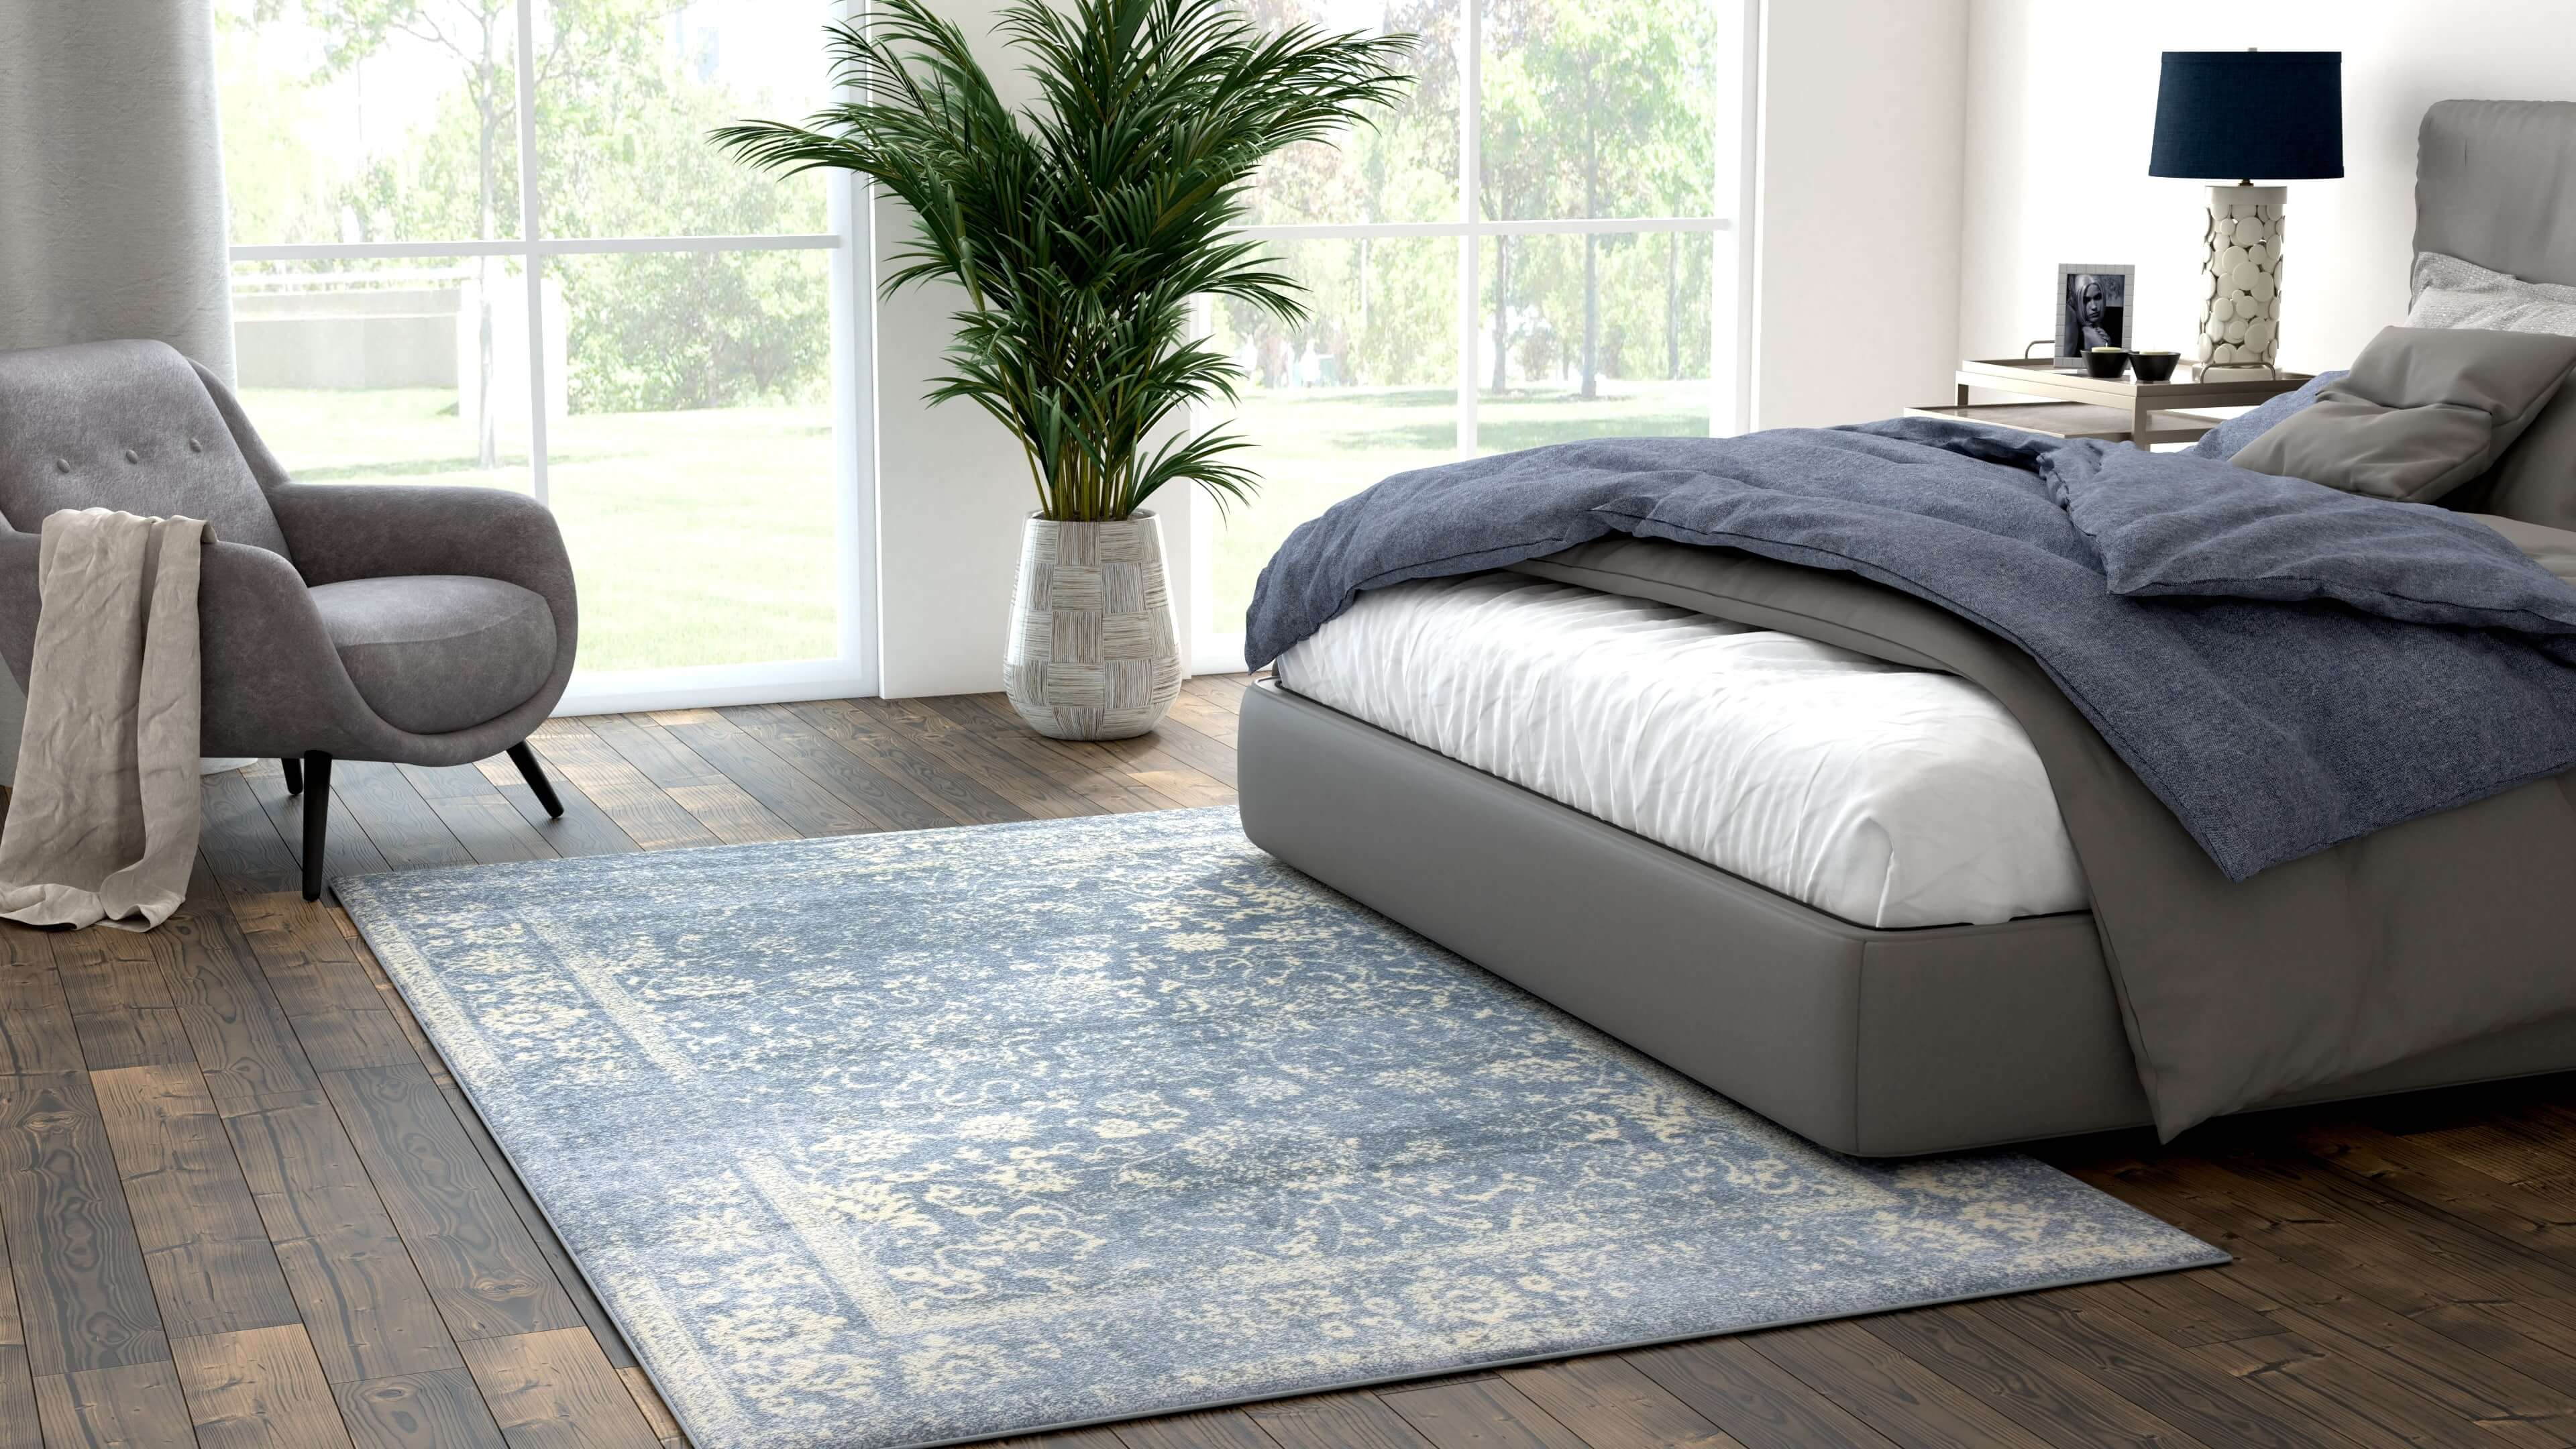 Kalora blue rug in 3D bedroom template created with imagine.io 